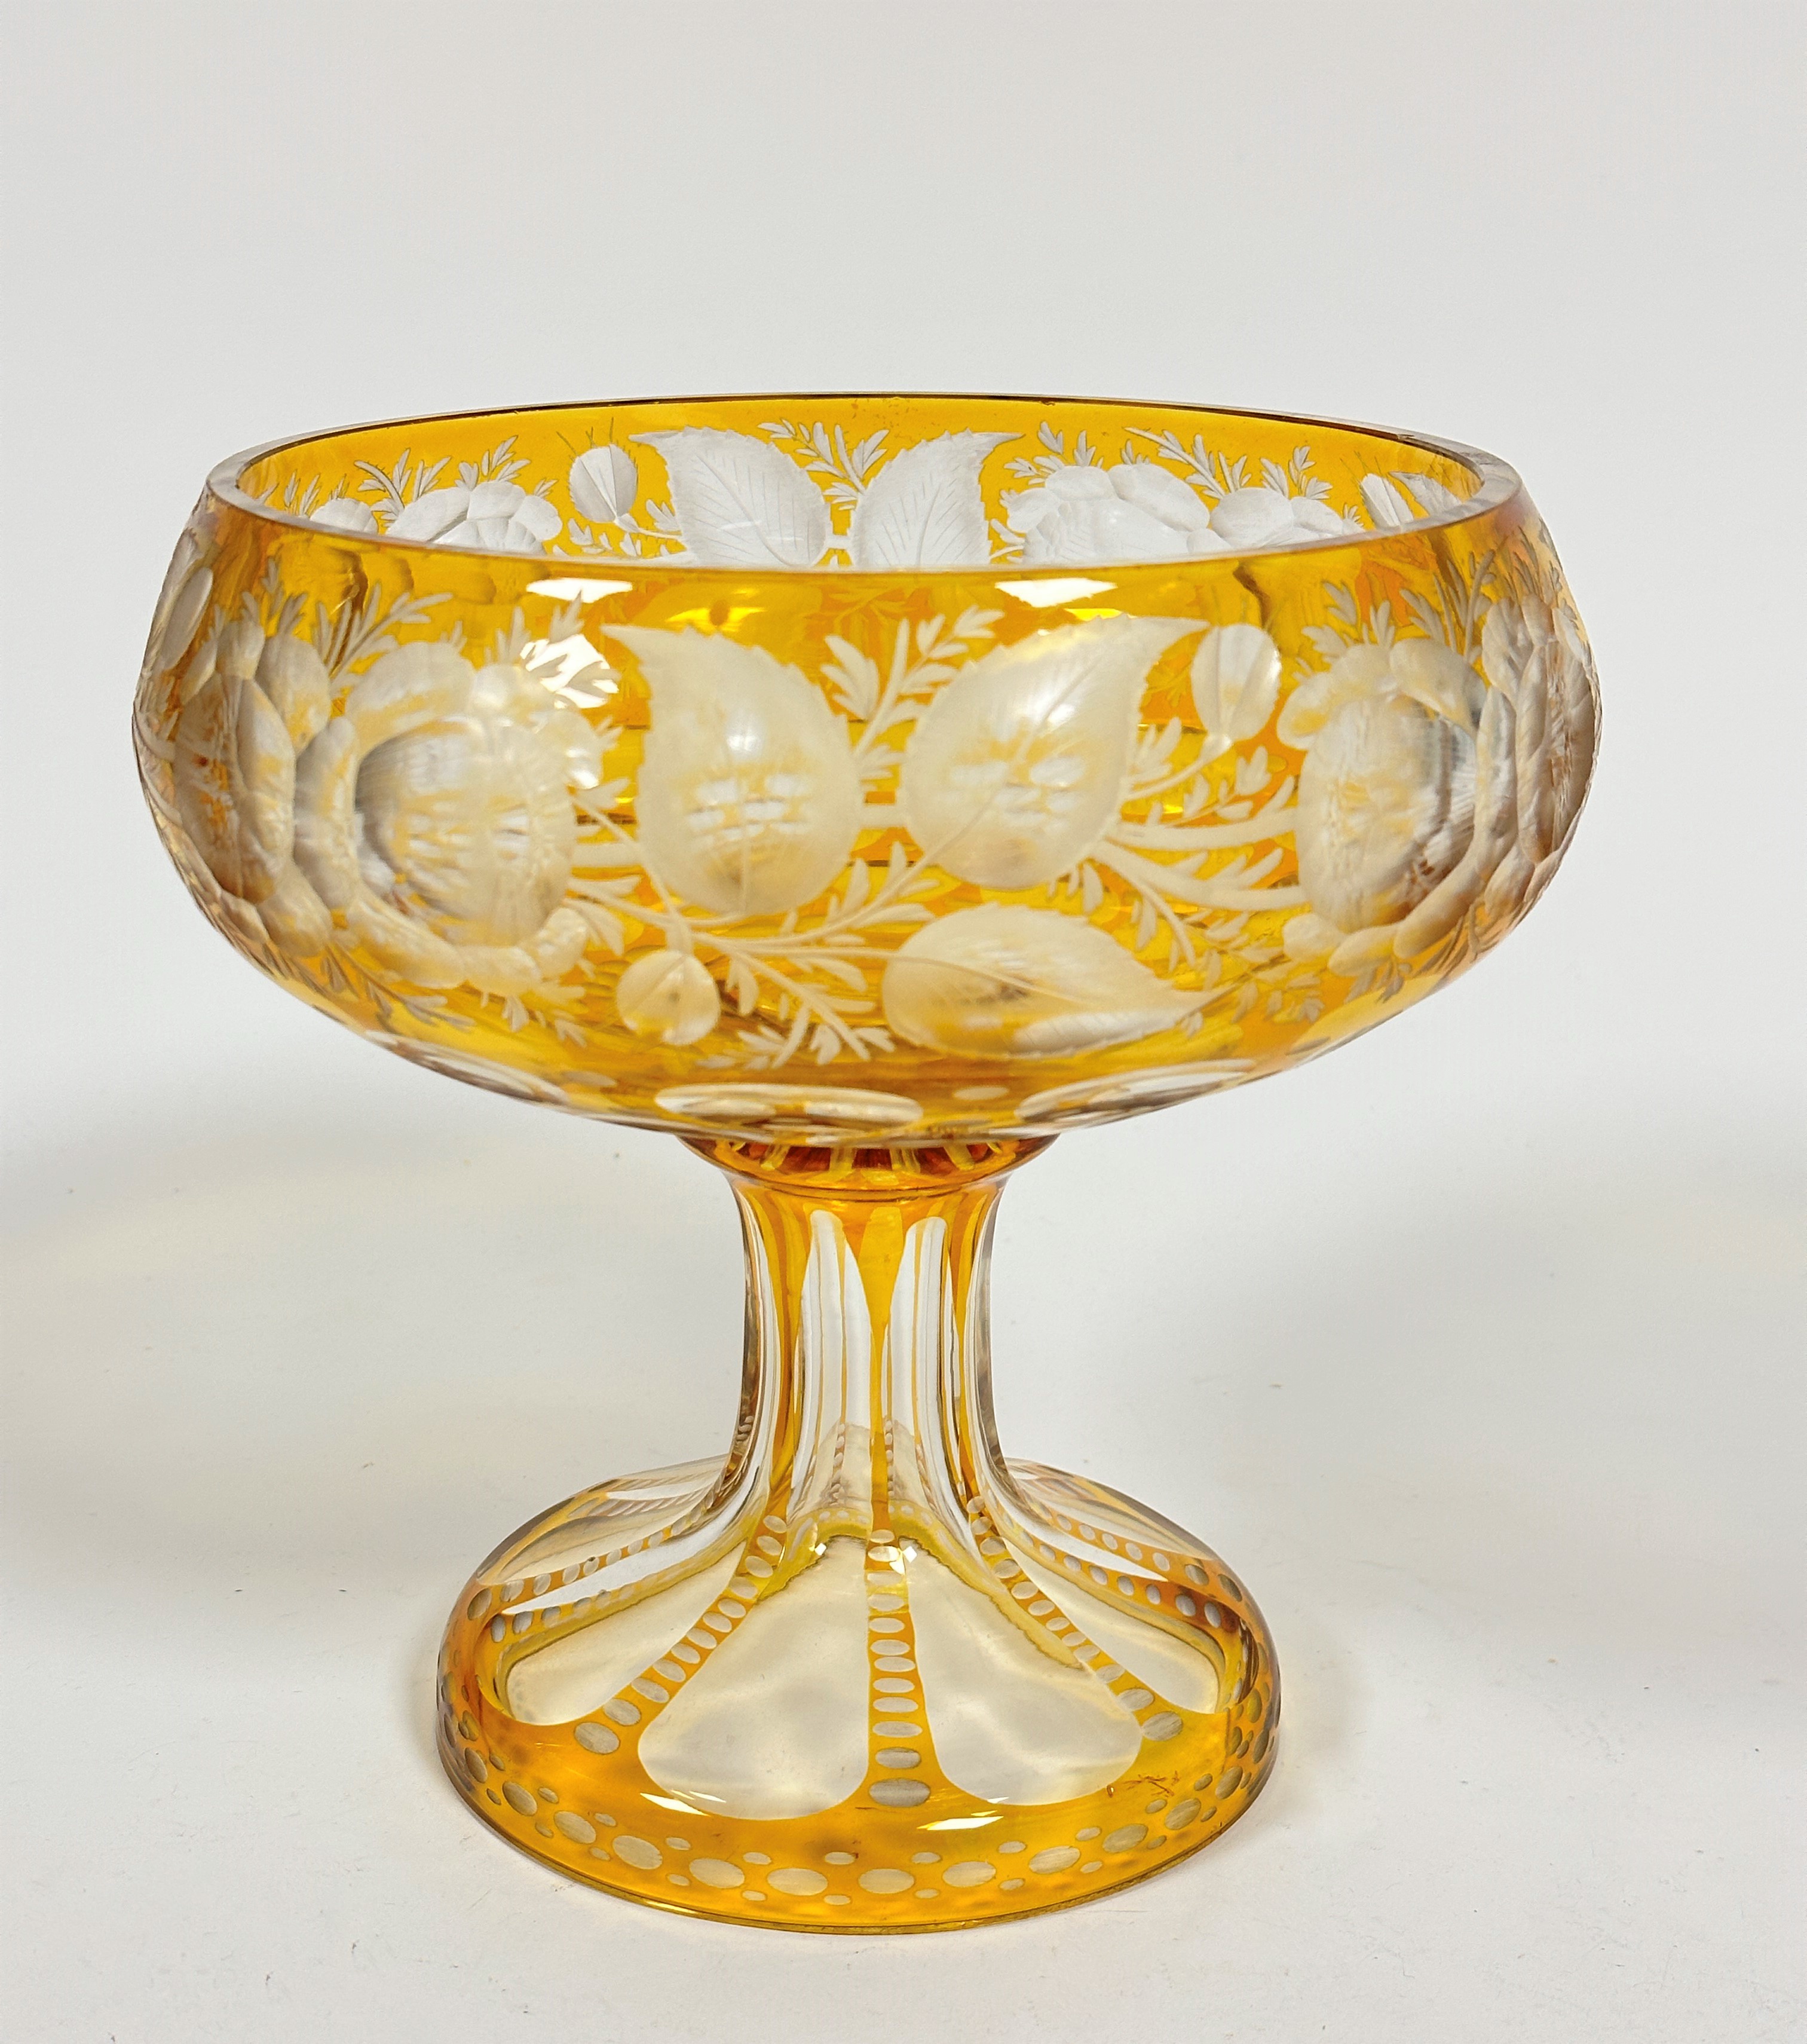 A large amber to clear slice cut fruit bowl with stylised flowers, leaves and panels, on faceted cut